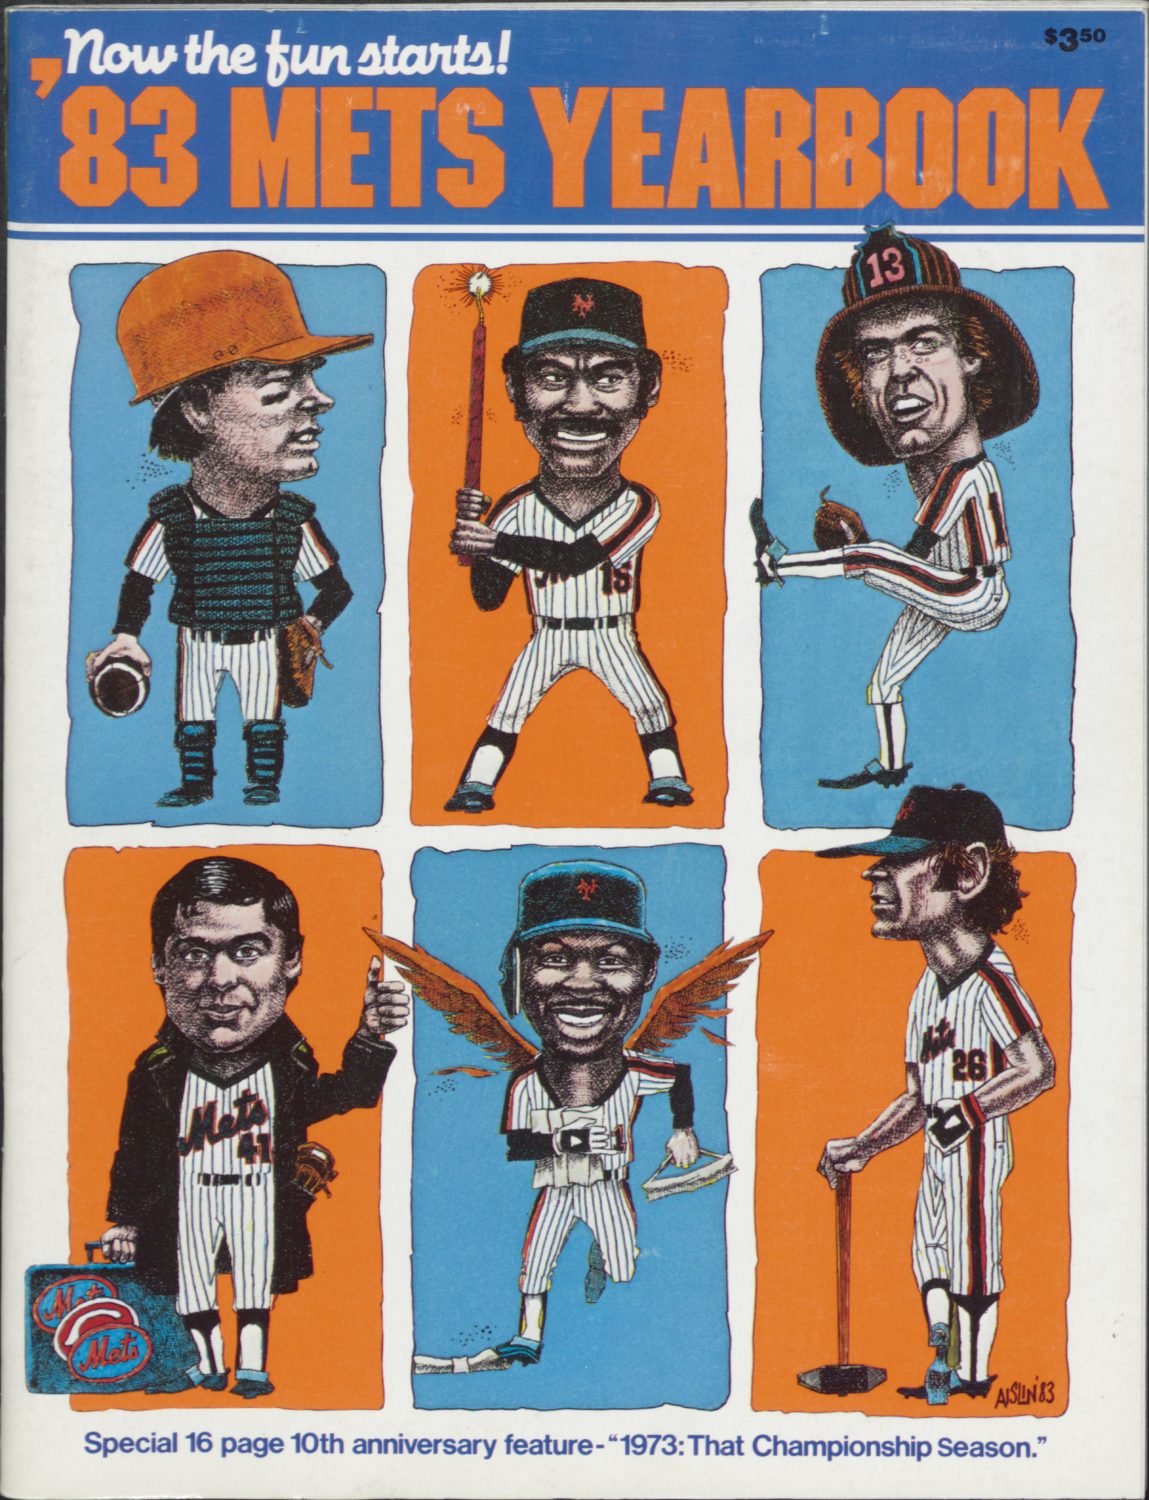 1983 Mets Yearbook: Now the Fun Starts